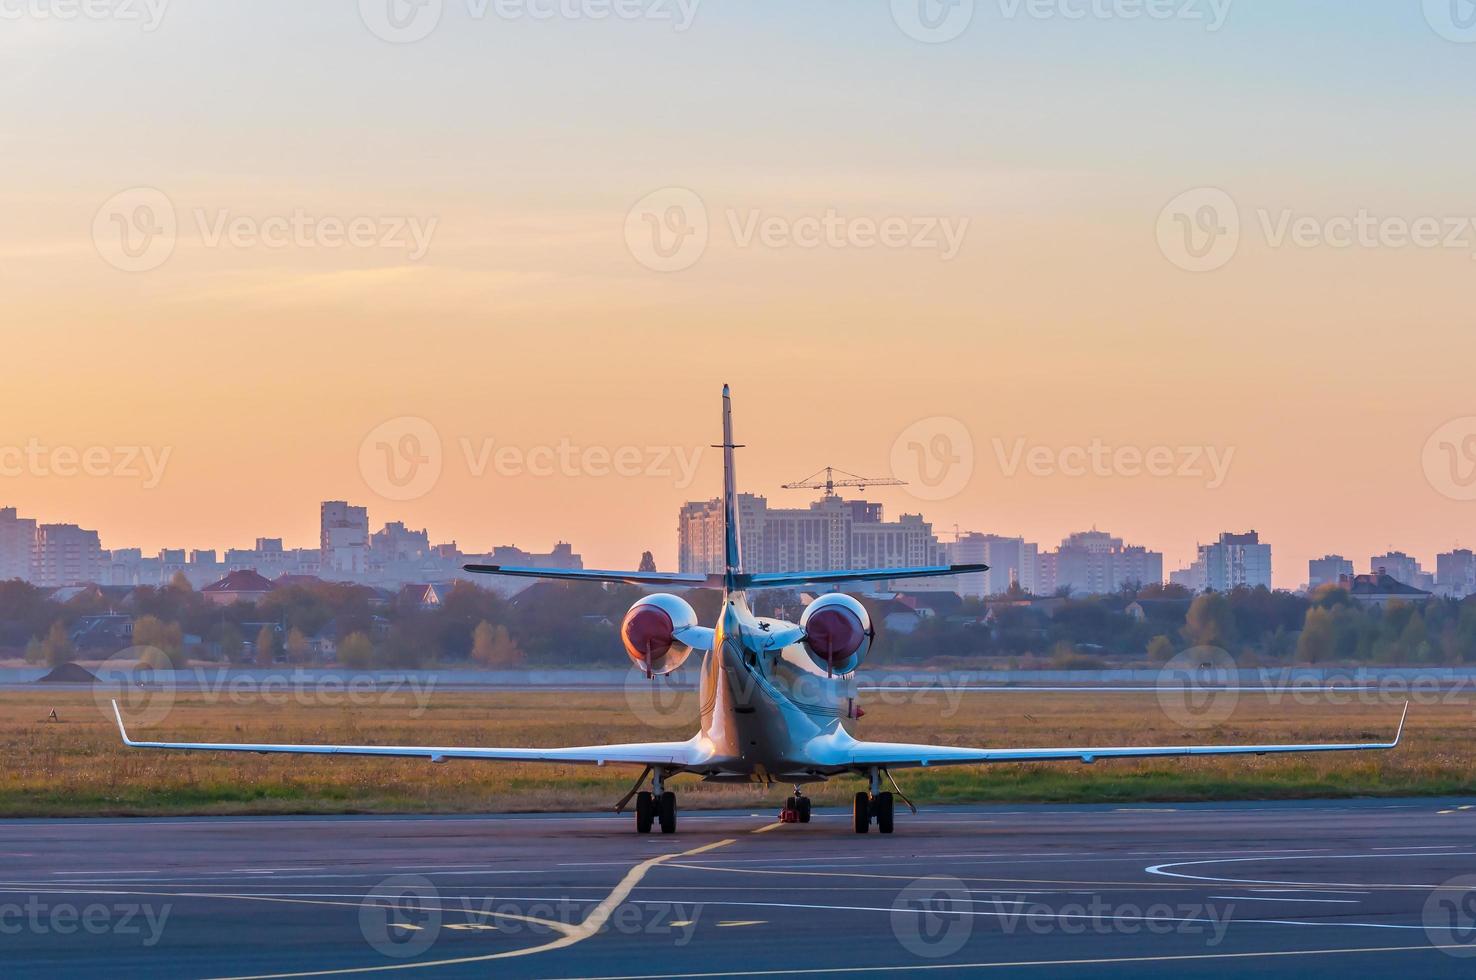 Business jet on the apron for aircraft. The plane against photo